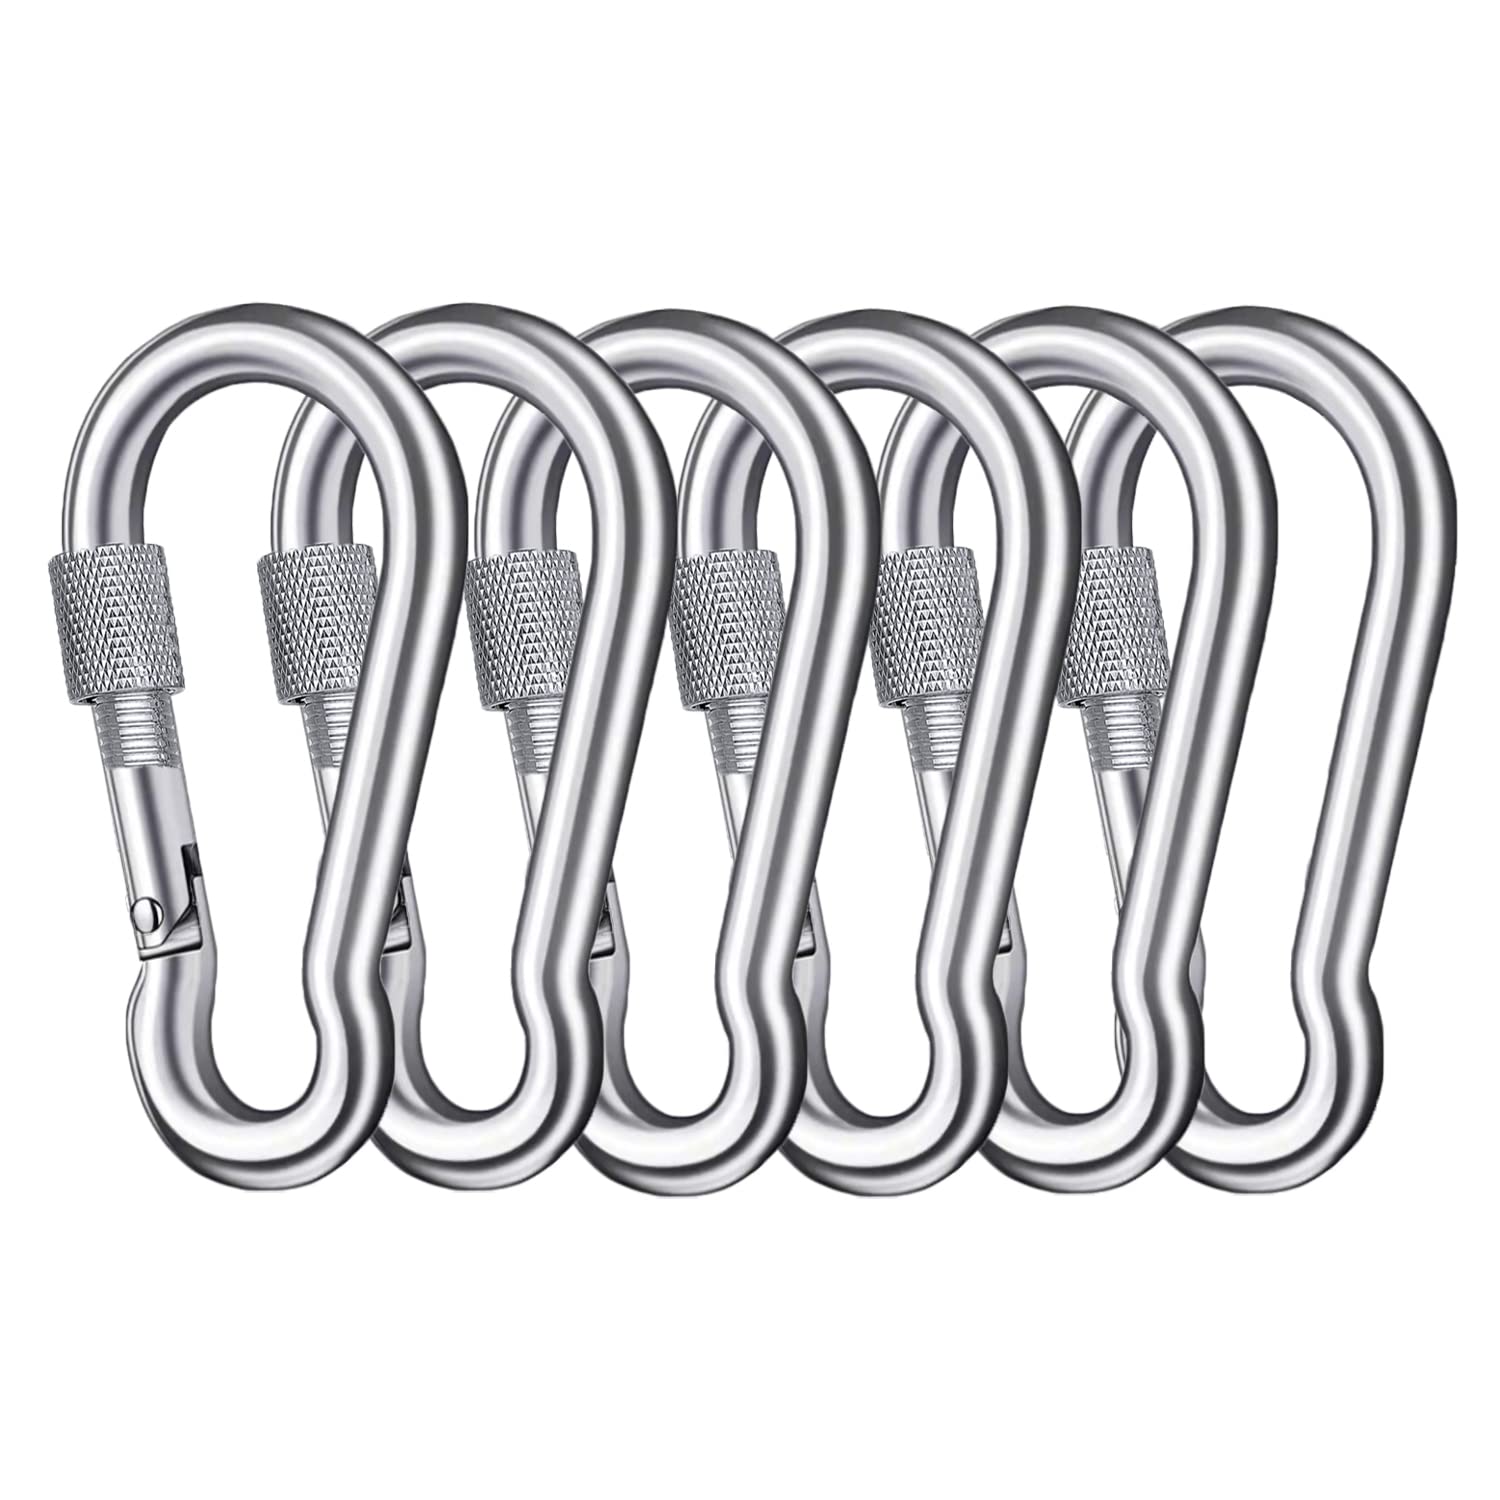 spend waterproof lb m10 carabiner Fourth have confidence Attendant